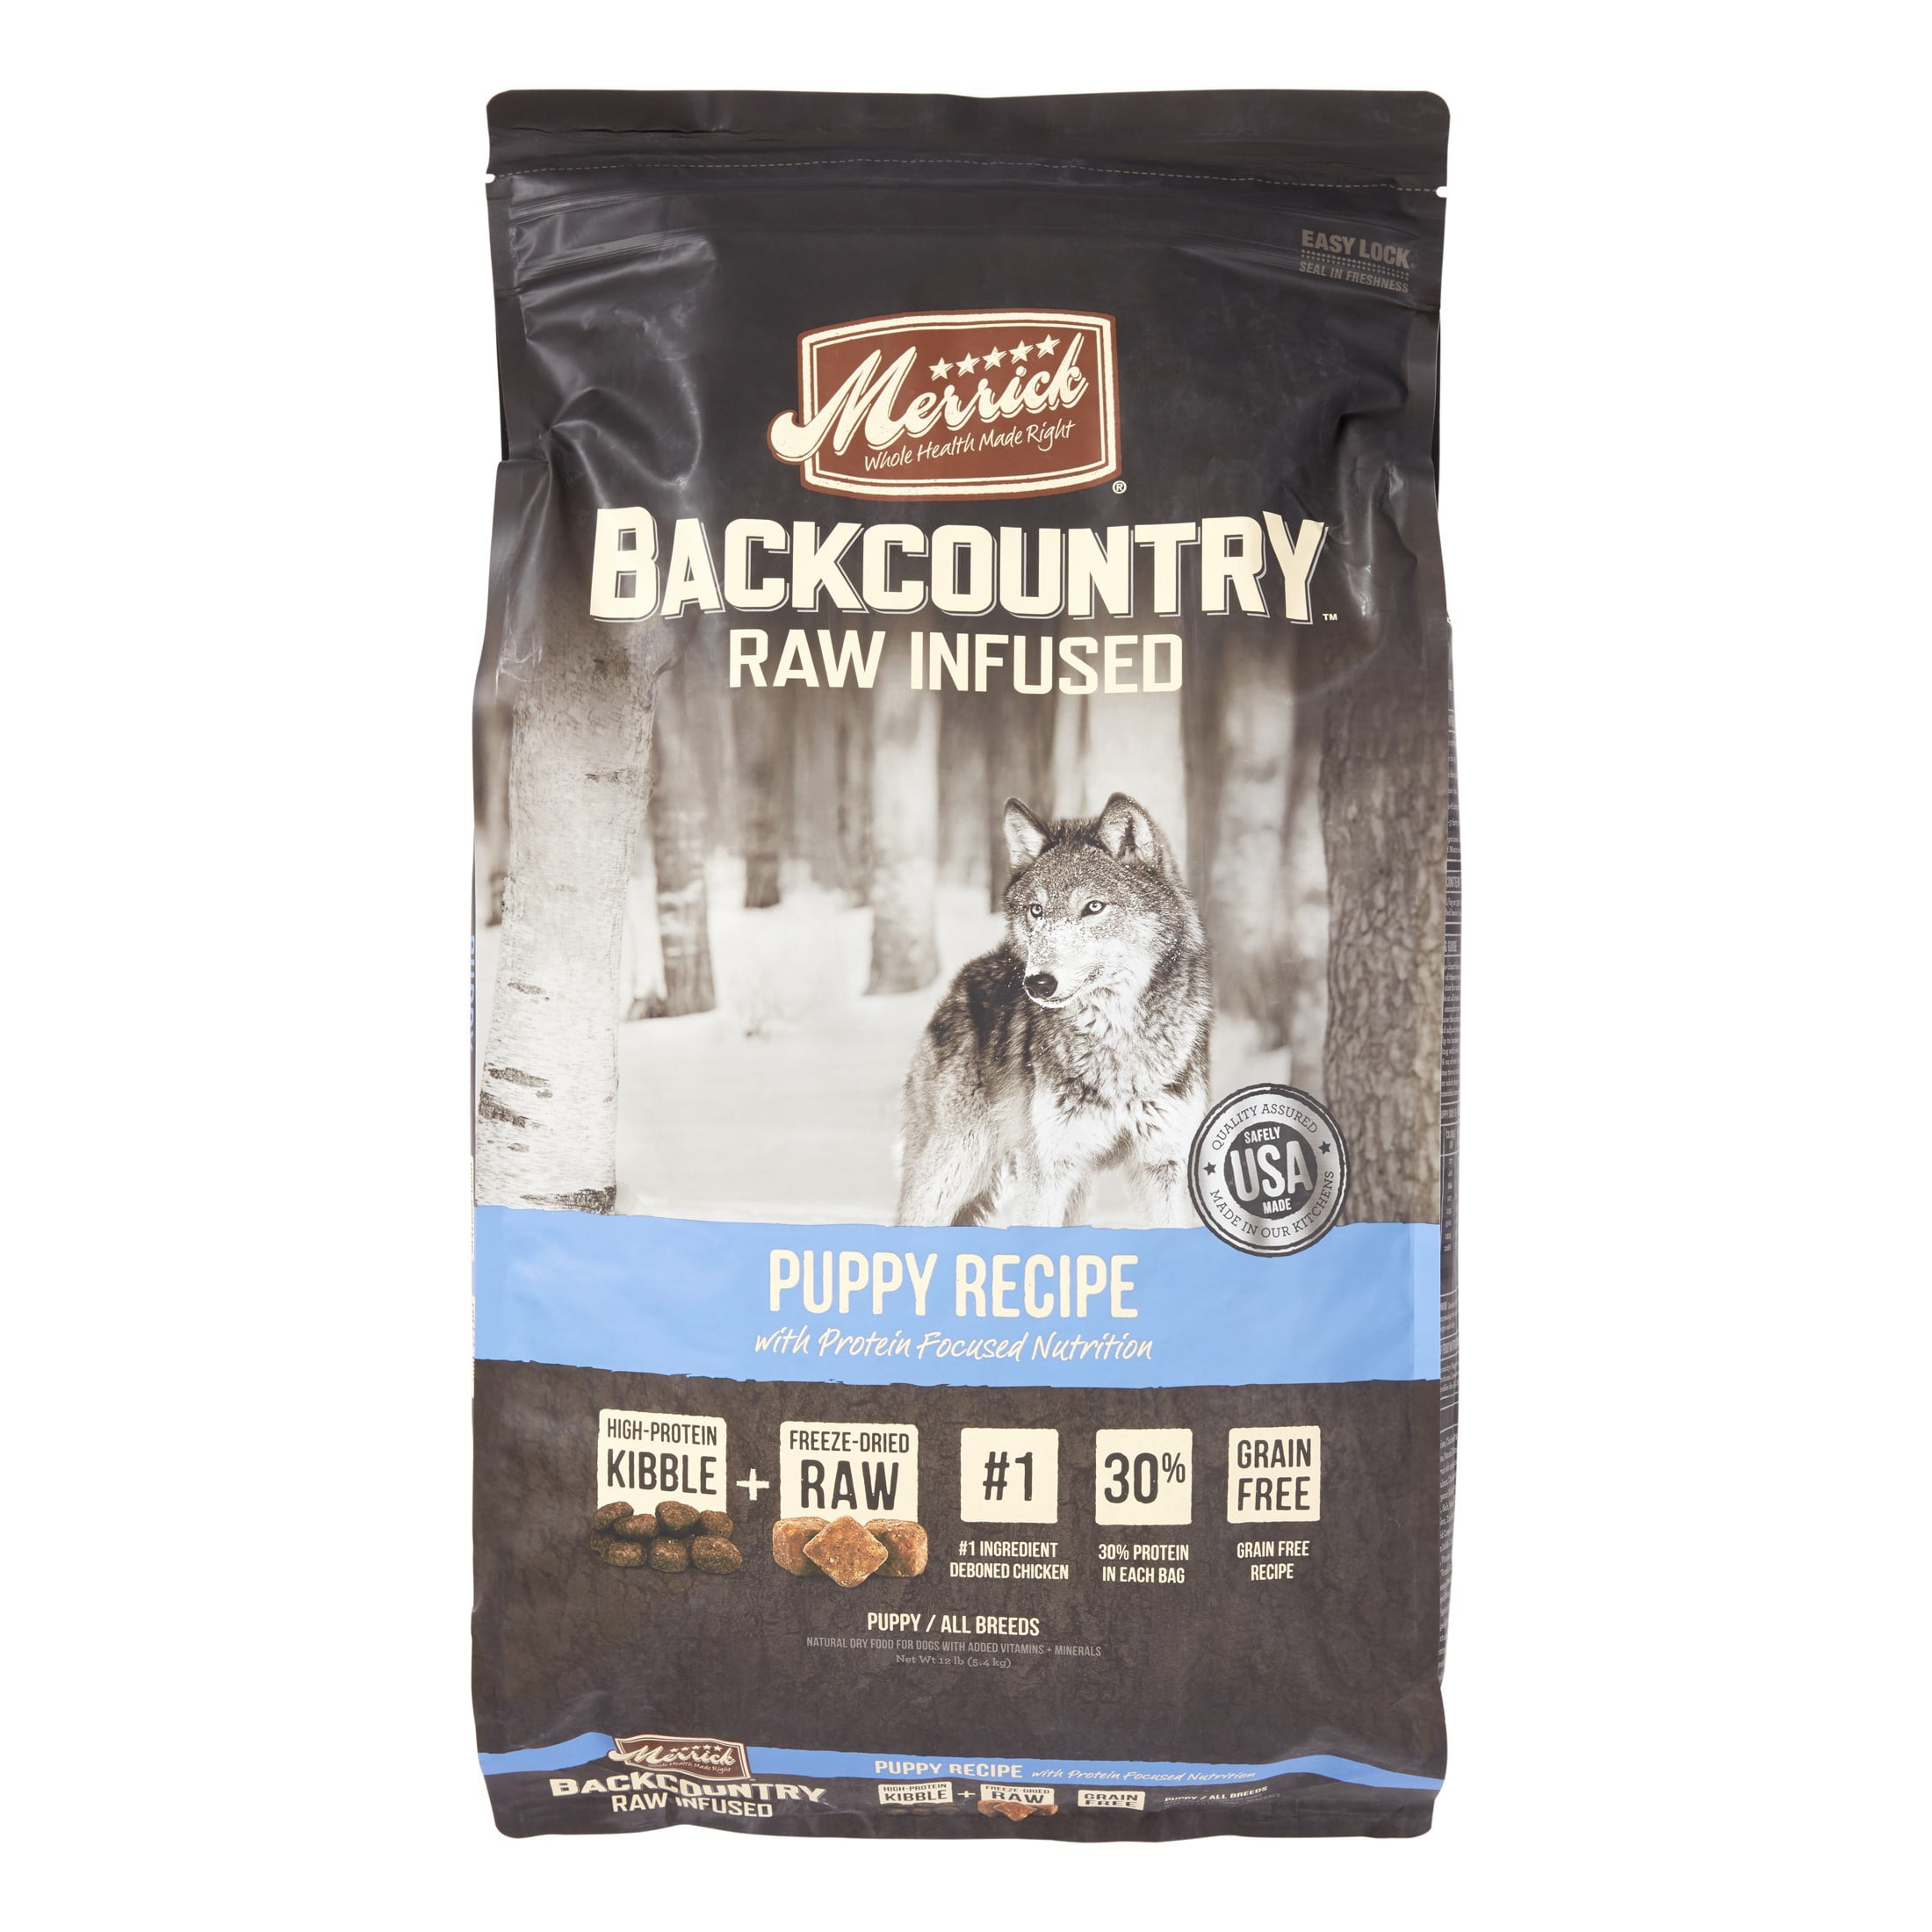 Merrick Backcountry GrainFree Raw Infused Puppy Recipe